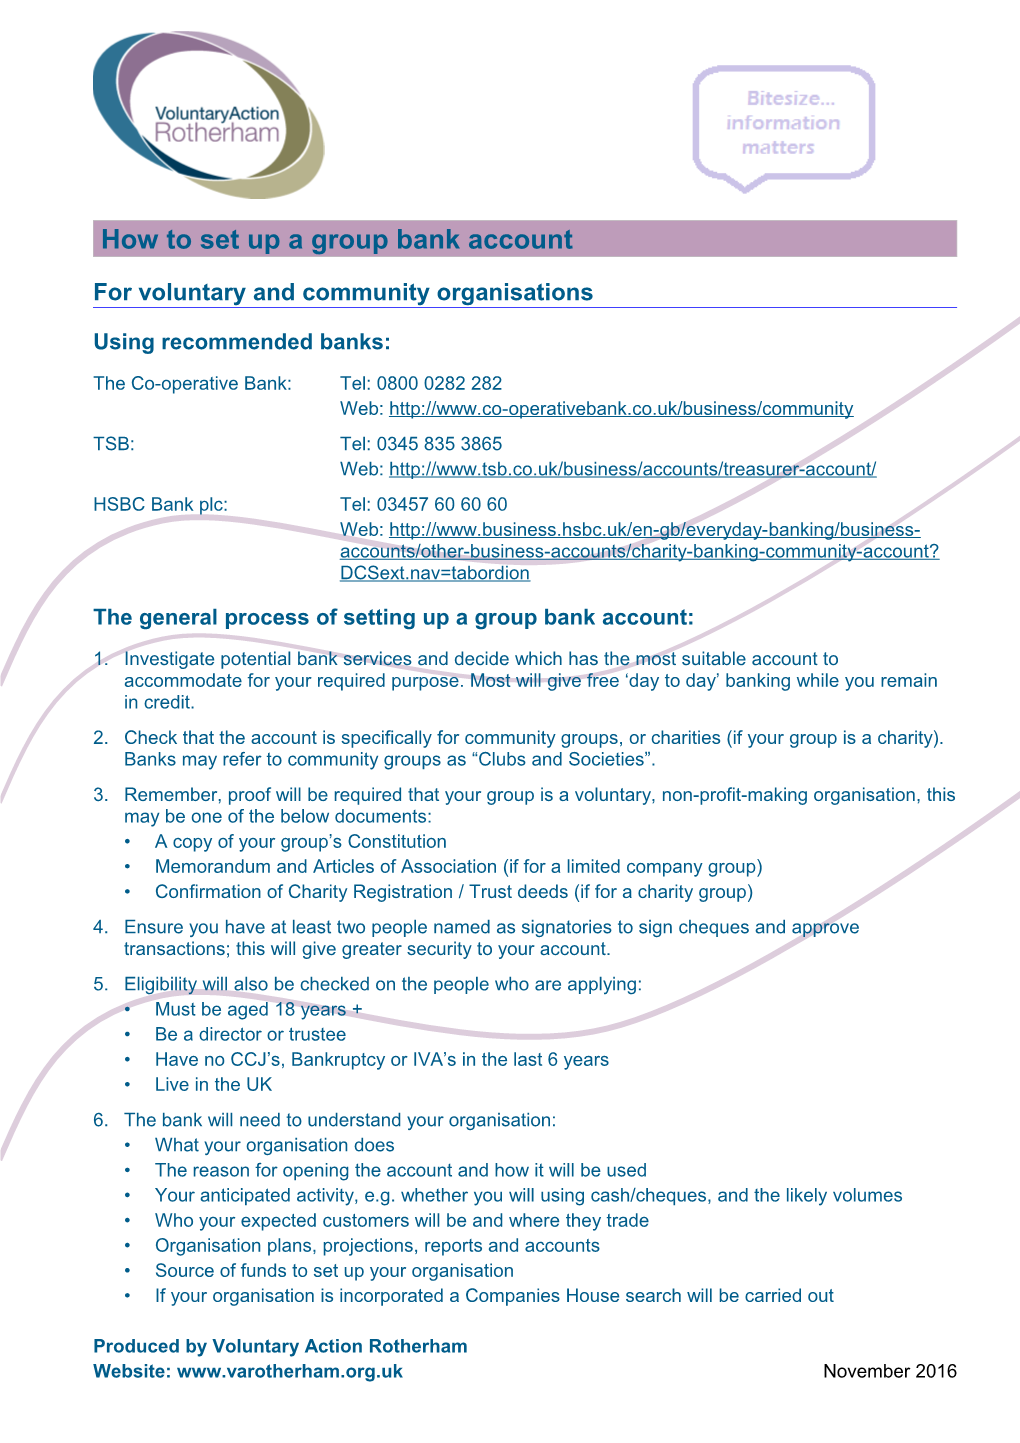 How to Set up a Group Bank Account